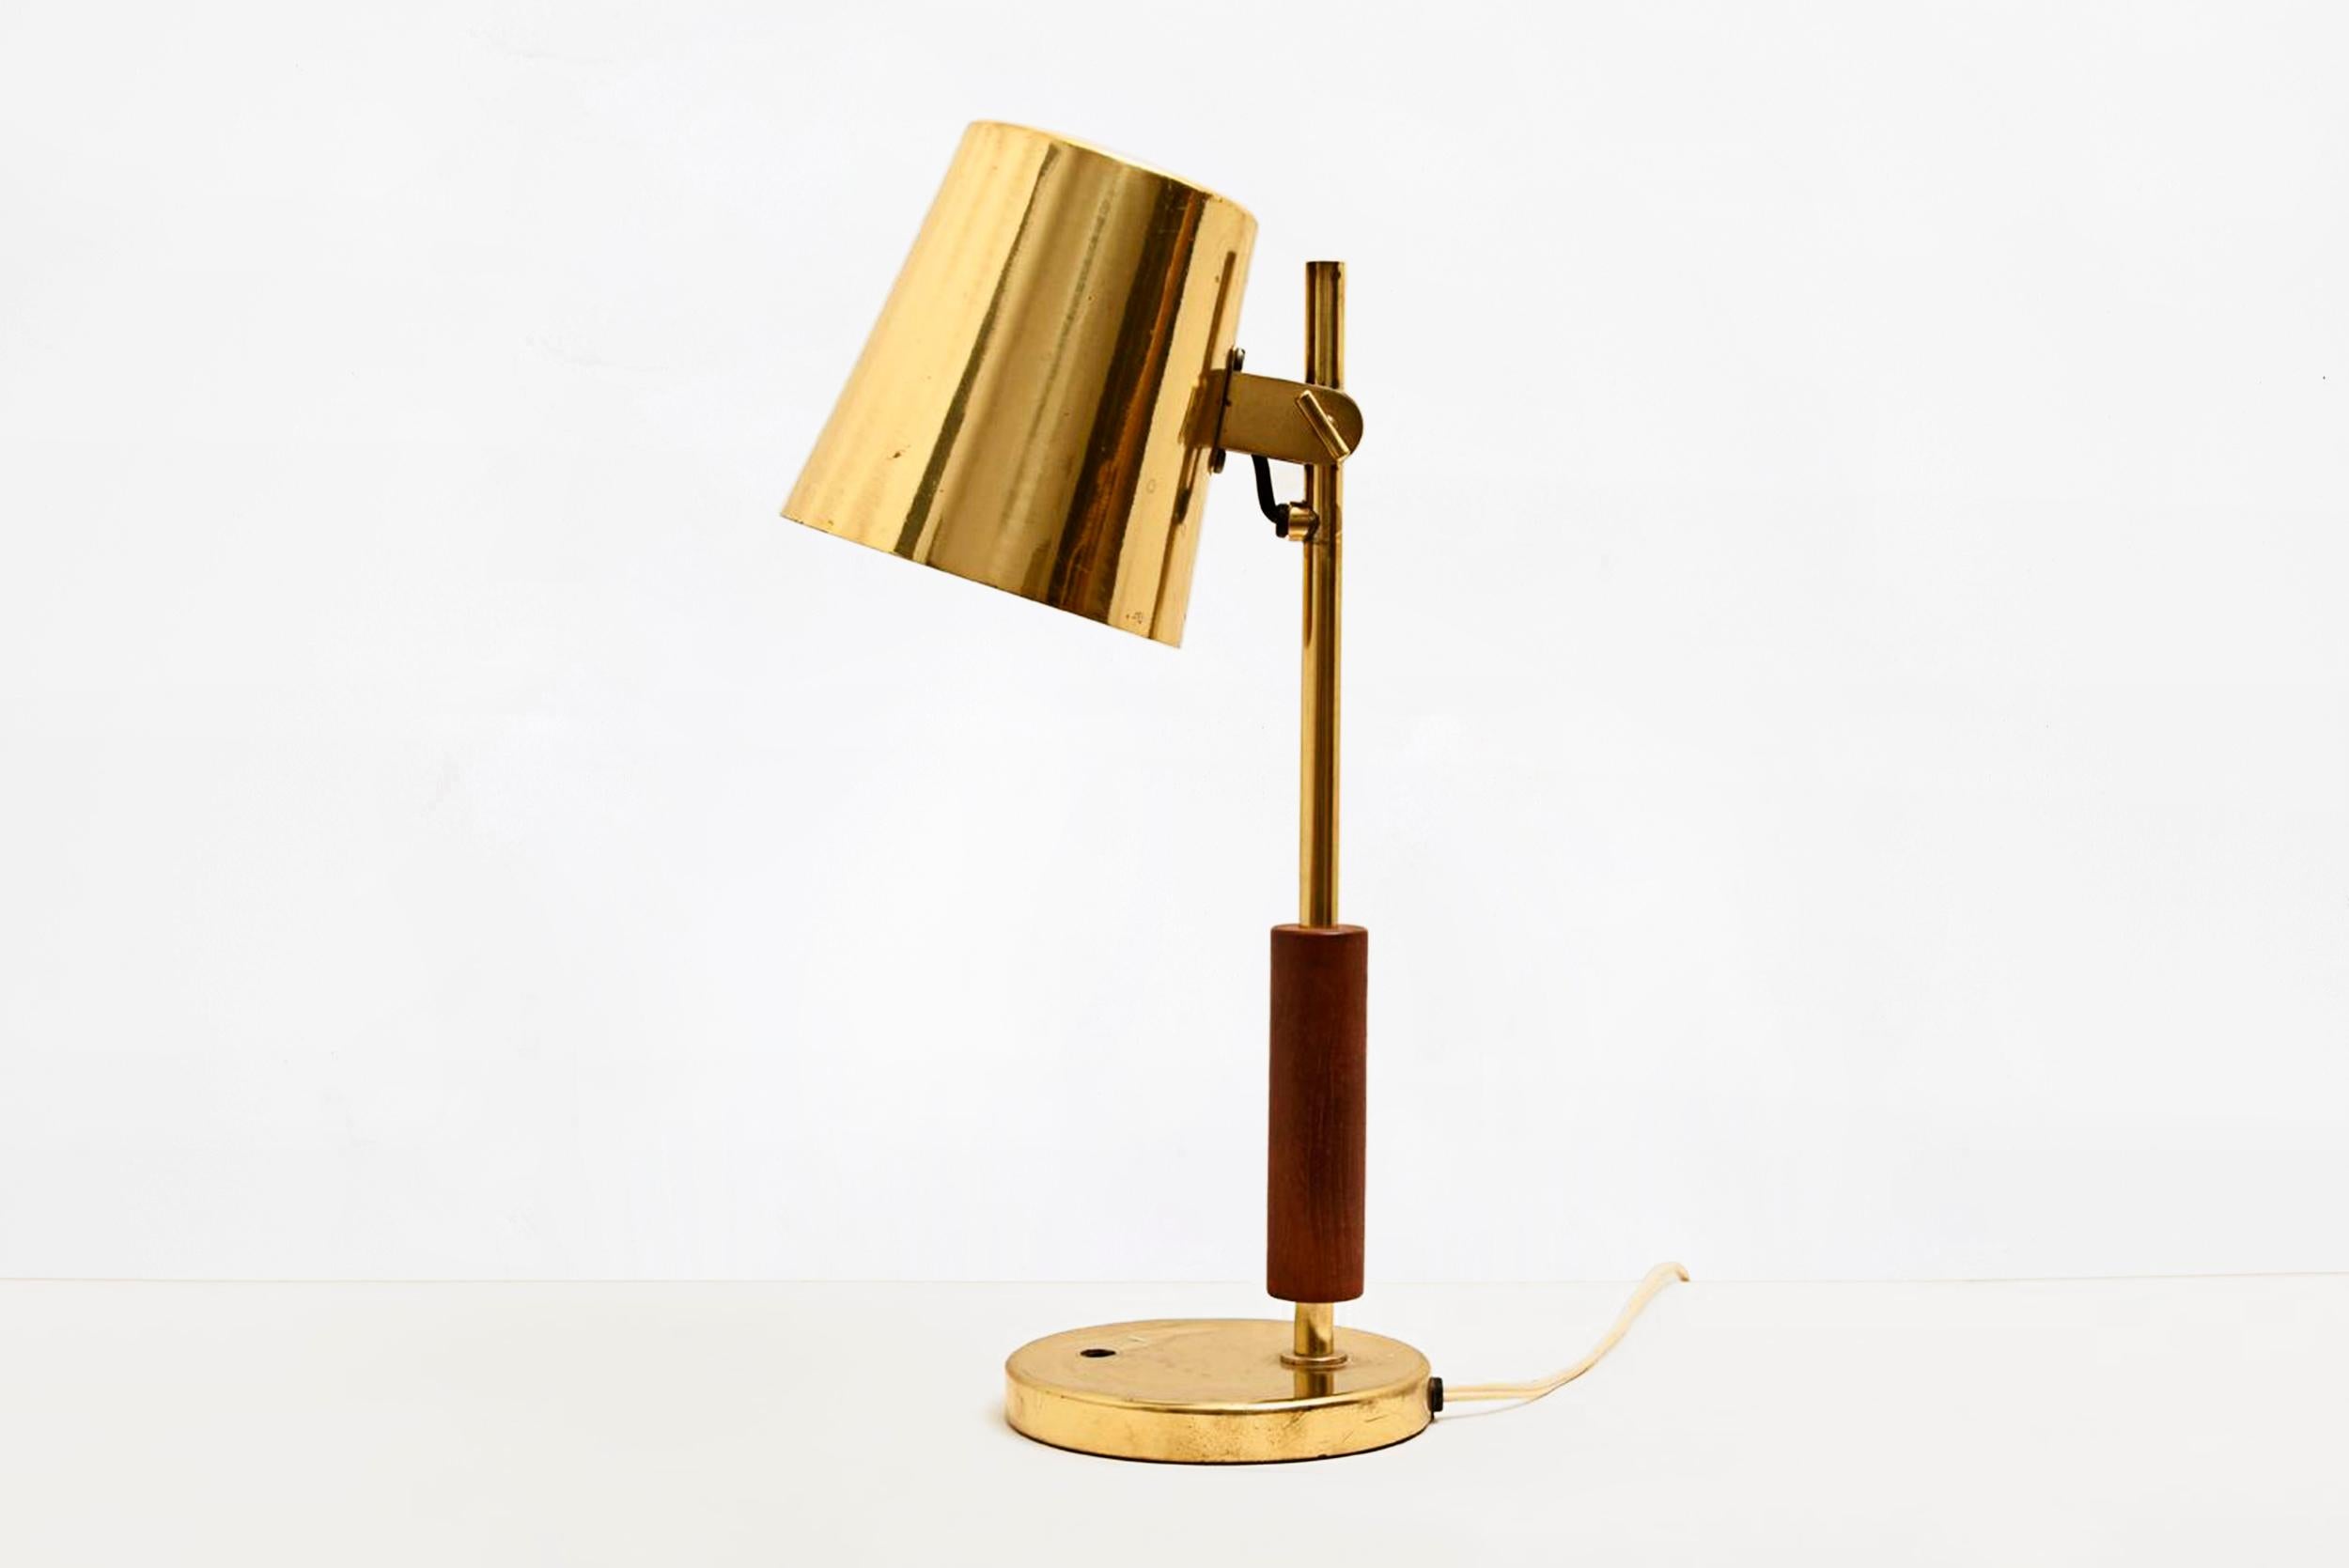 Paavo Tynell 
Table lamp
Commissioned for the “Hotell Vaakuna”
Finland, 1940
Brass, teak
From the archives of Side Gallery 

Measurements:
32 cm x 41 H cm
12.5 in x 16 H in

Bio
Paavo Tynell (1890-1973) was an Industrial designer, known